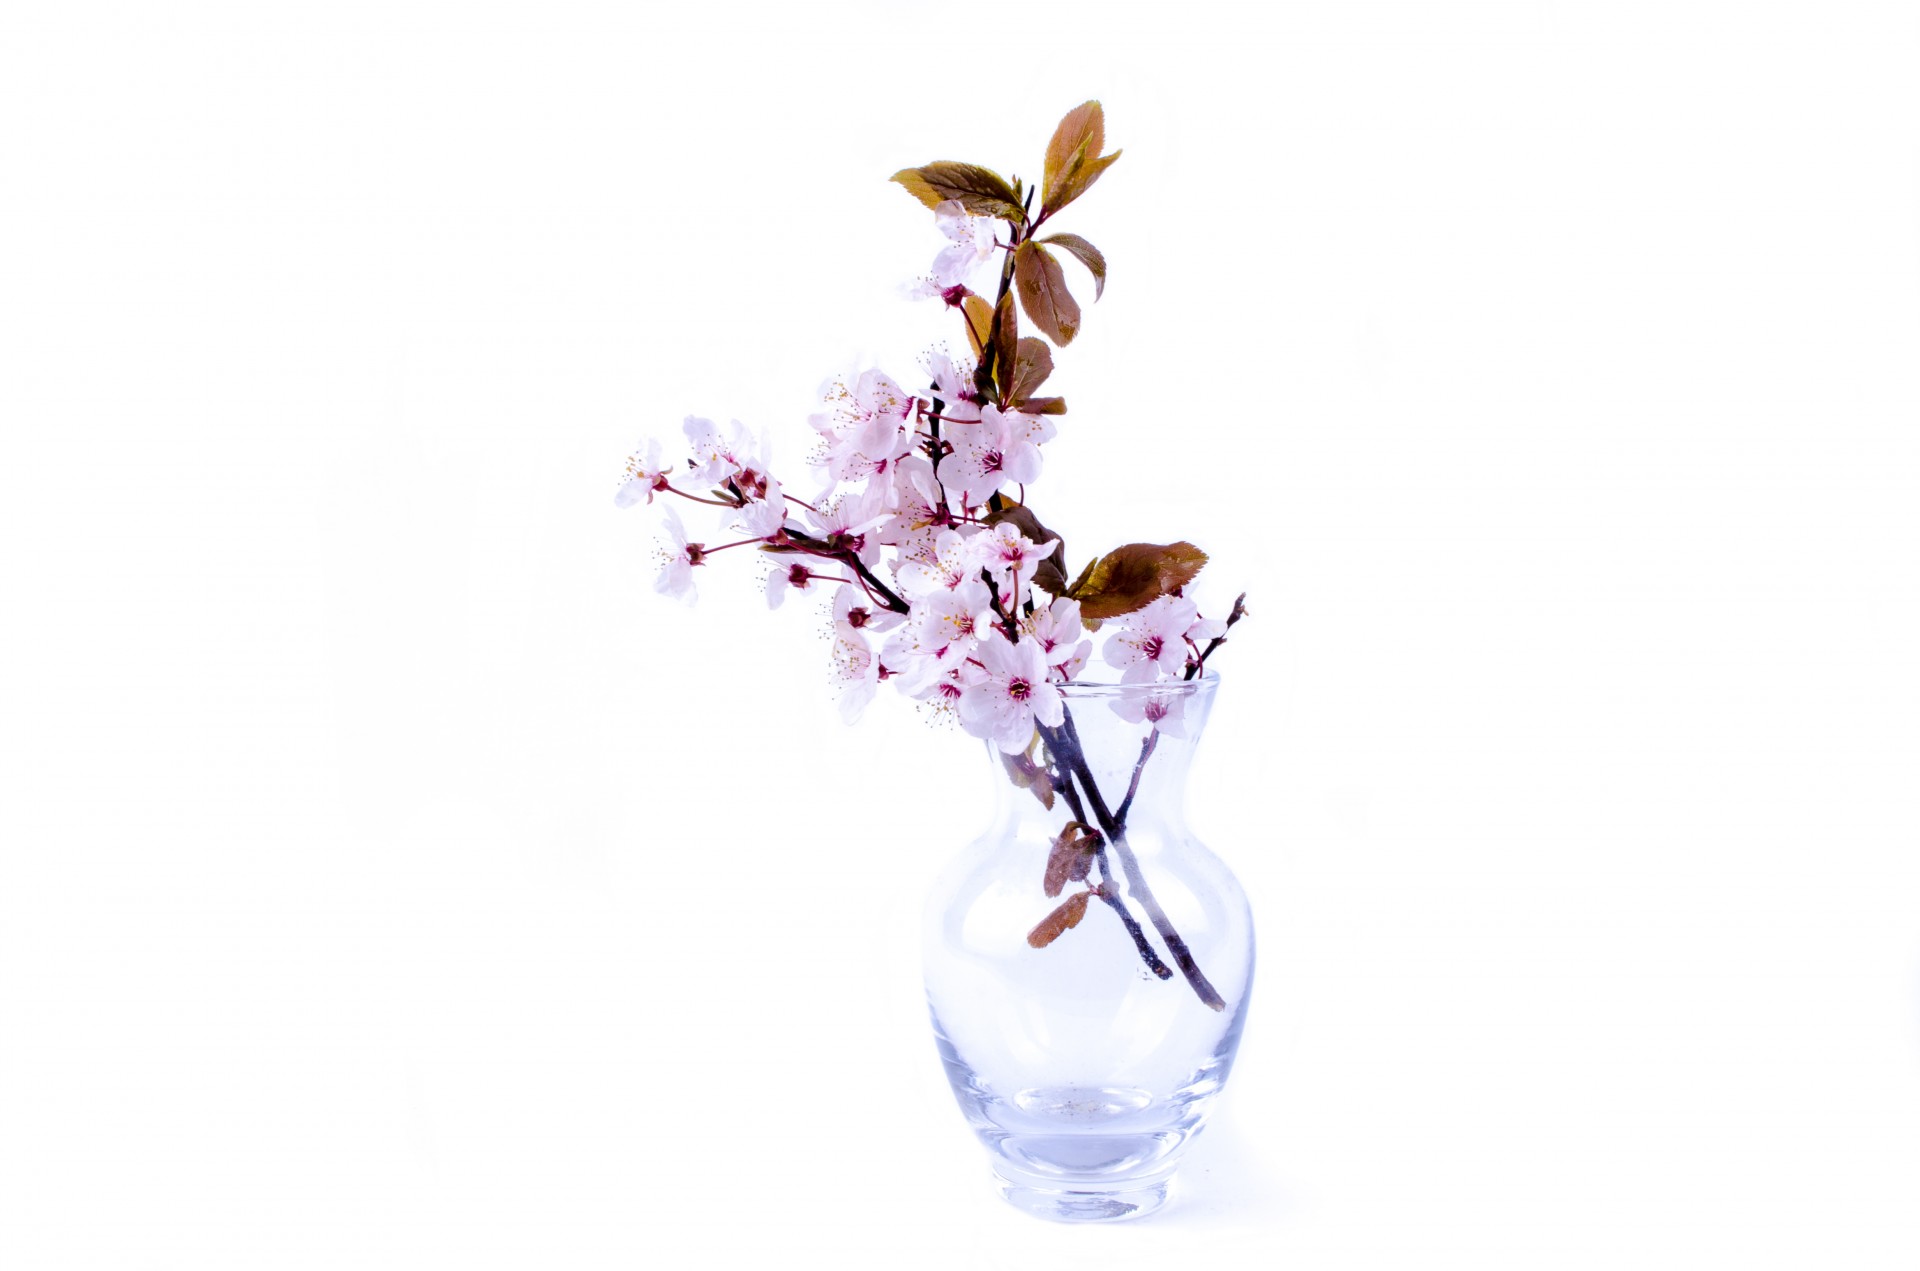 Blossoming Branches In The Vase